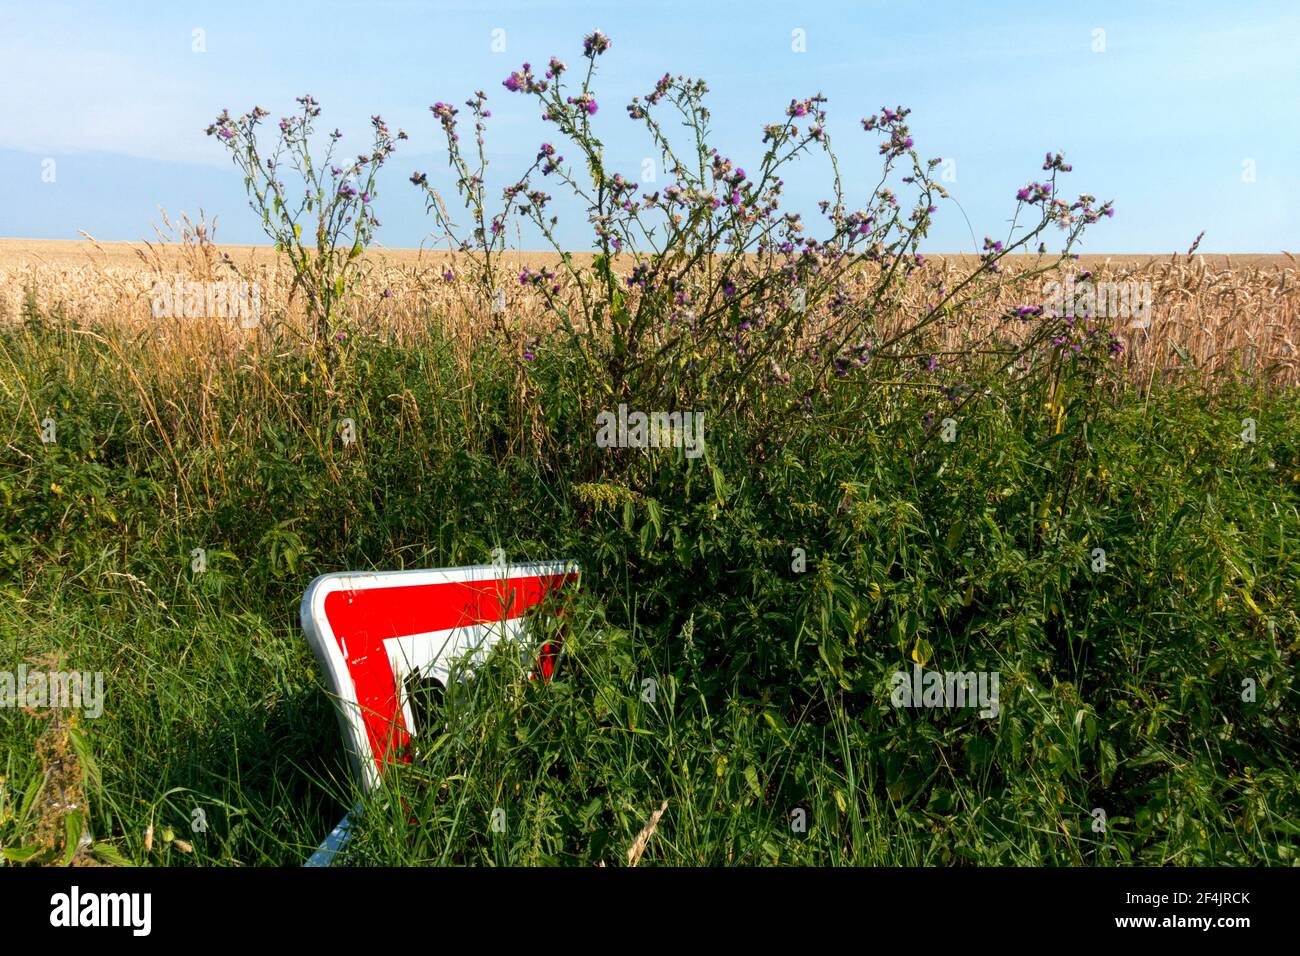 Road sign lying in a ditch, hidden by plants Stock Photo